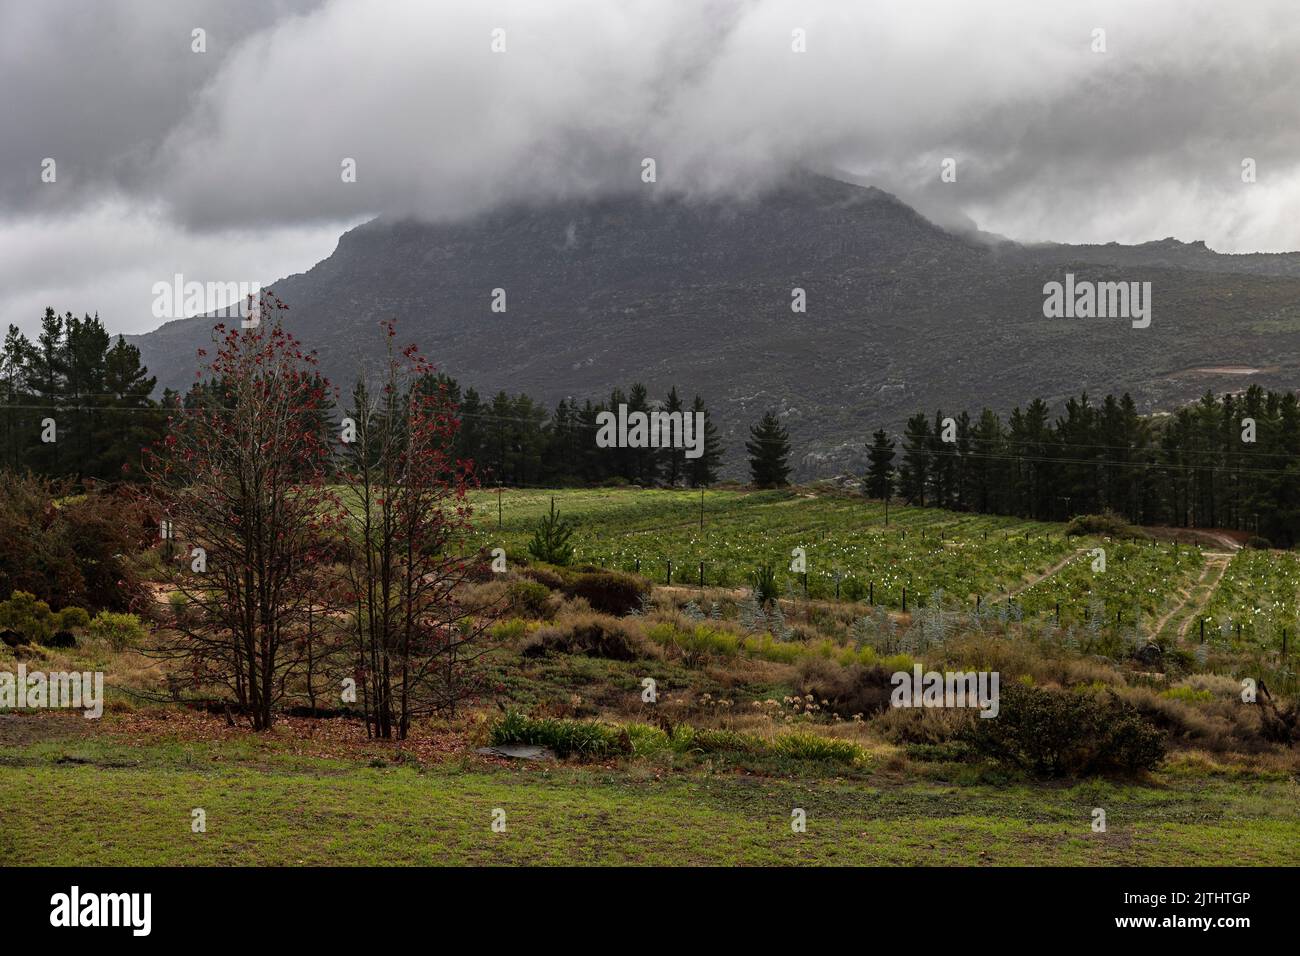 A scenic view of a field, pine tree forest, and mountain covered with rainy clouds behind. Stock Photo